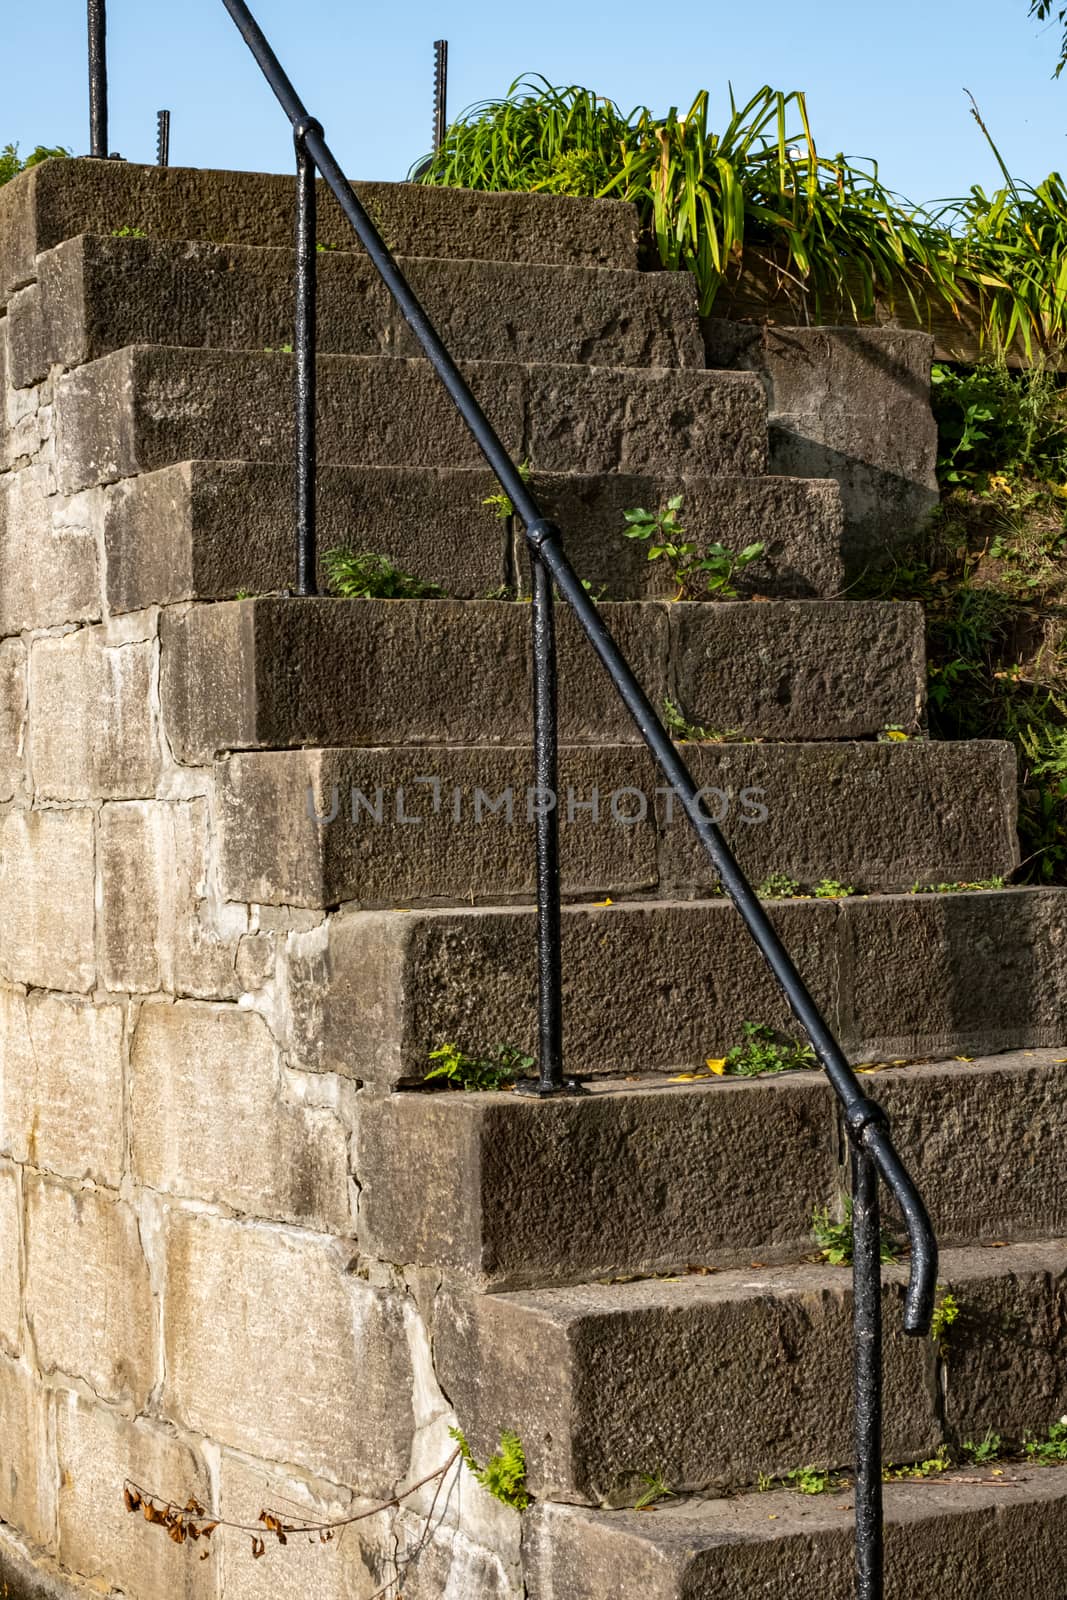 An old stone staircase with an iron railing is embedded into the side of a hill, with plants visible beside it, and growing through its cracks.